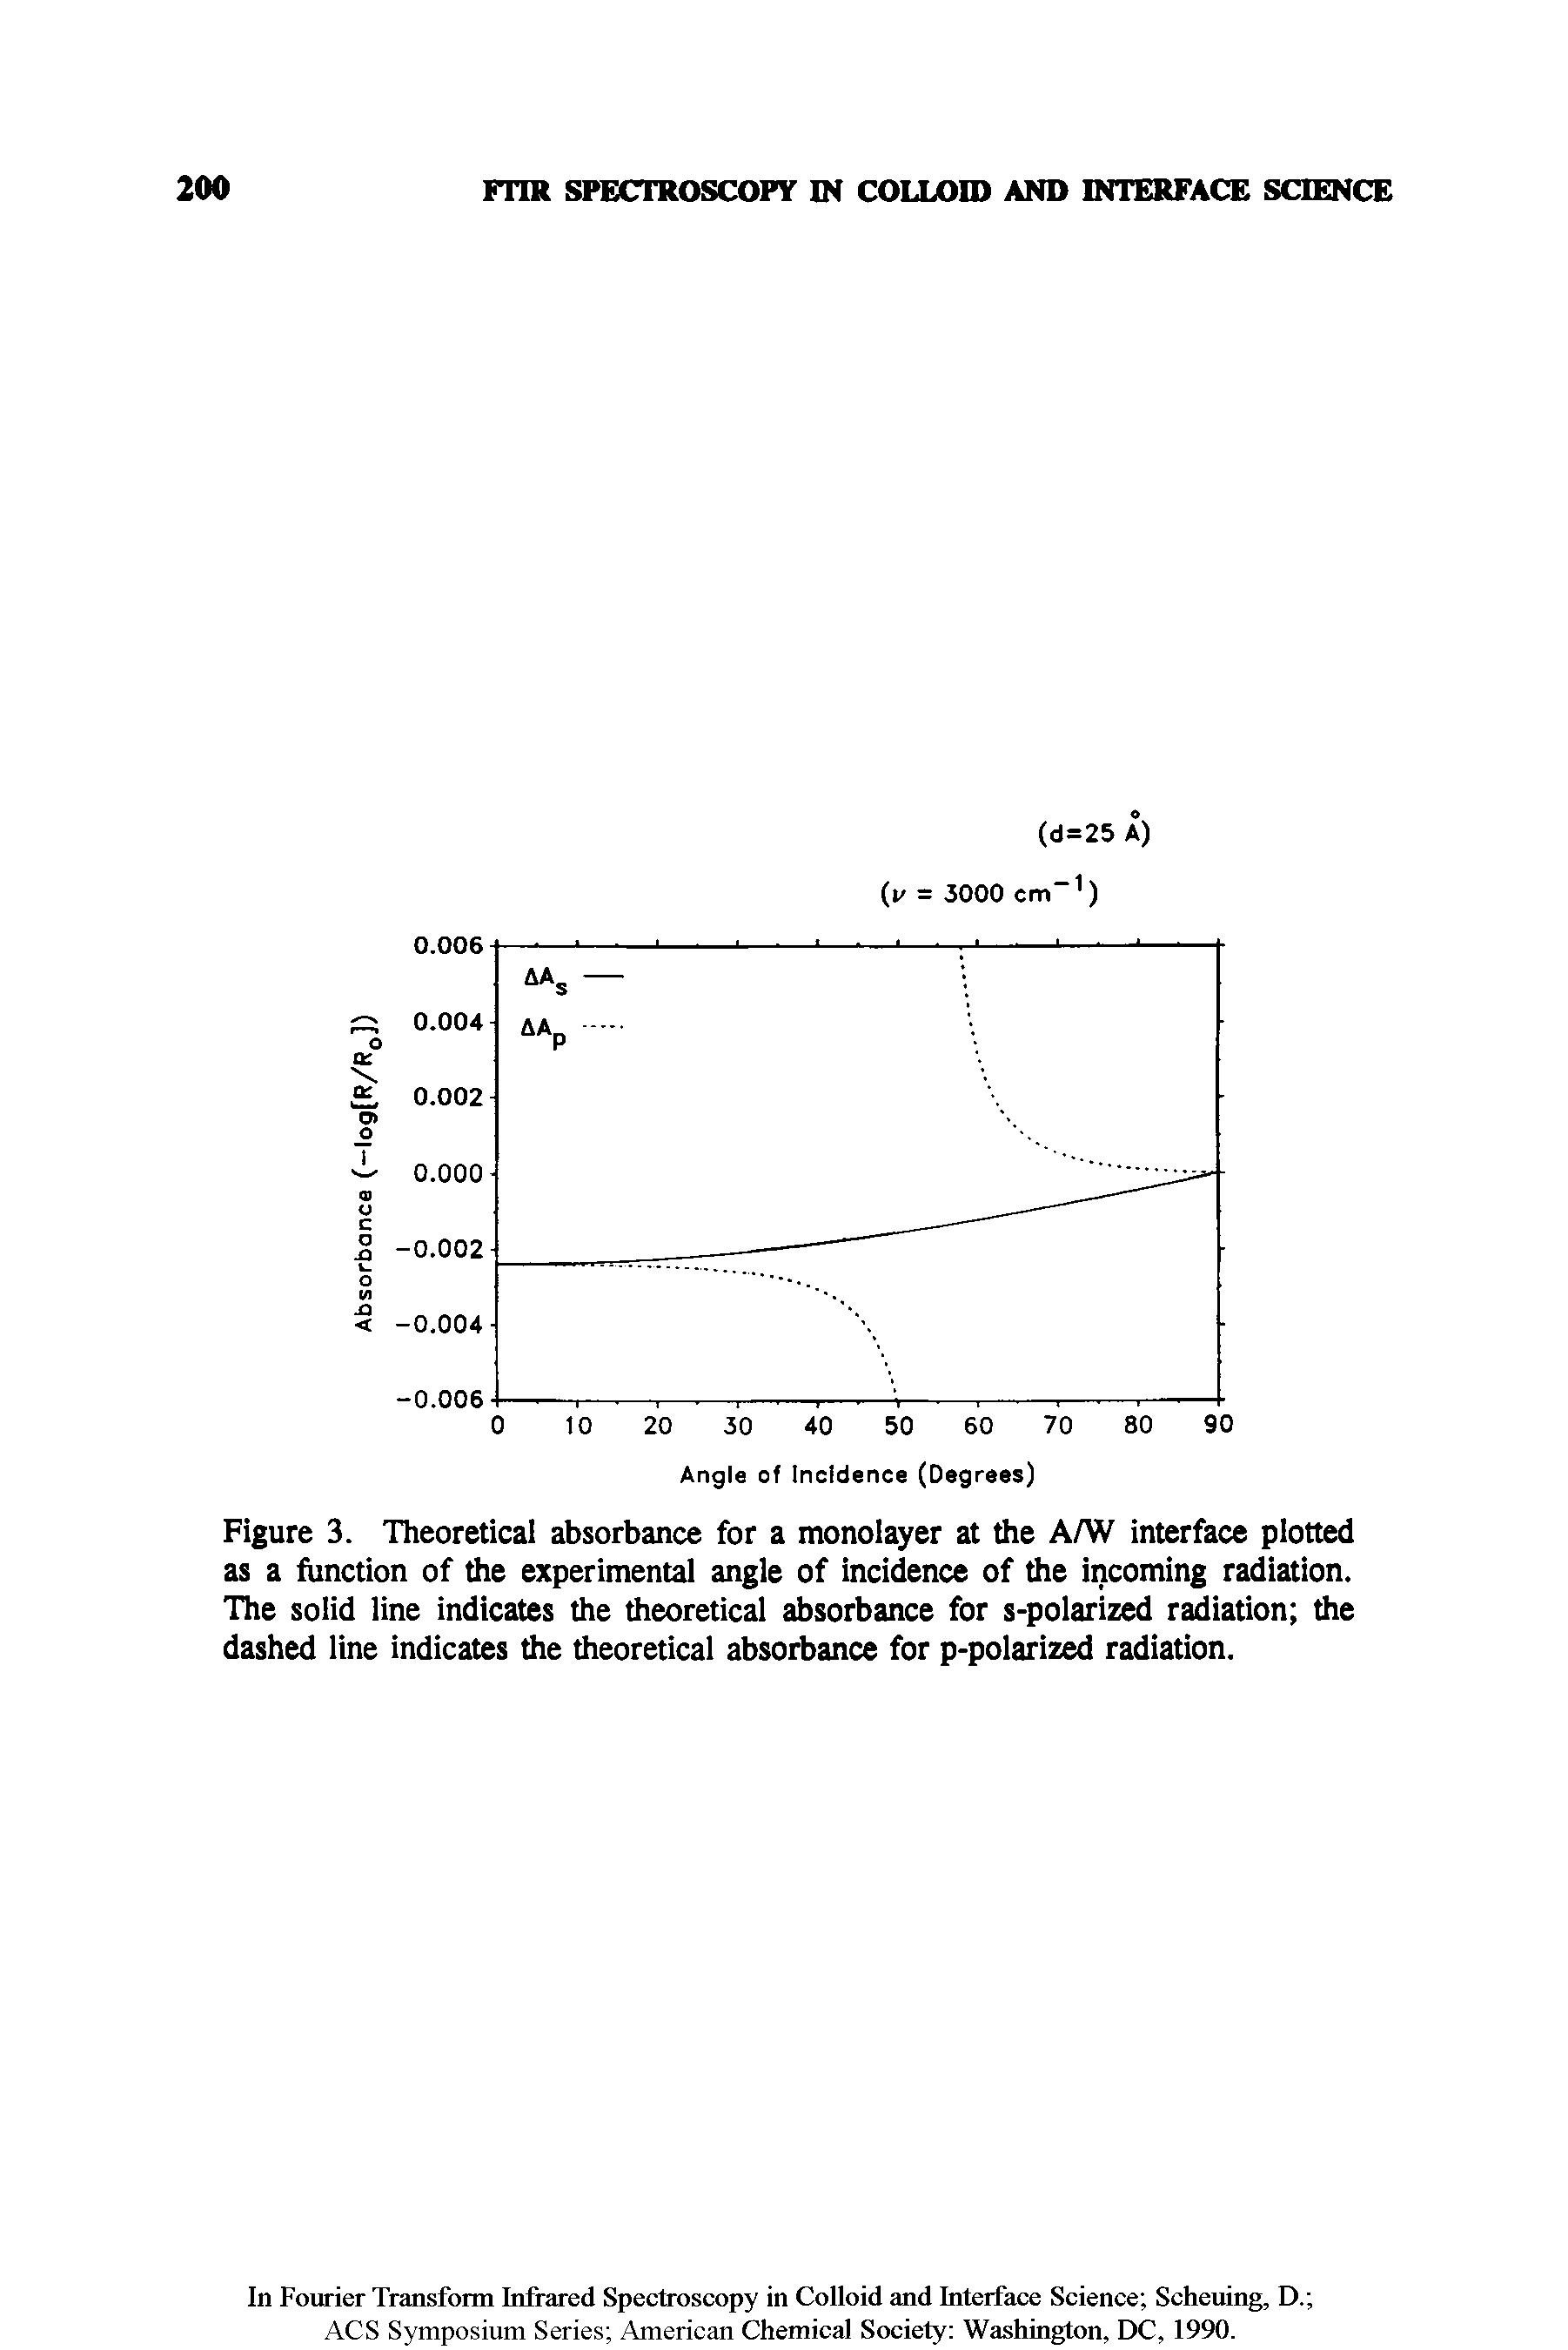 Figure 3. Theoretical absorbance for a monolayer at the A/W interface plotted as a function of the experimental angle of incidence of the incoming radiation. The solid line indicates the theoretical absorbance for s-polarized radiation the dashed line indicates the theoretical absorbance for p-polarized radiation.